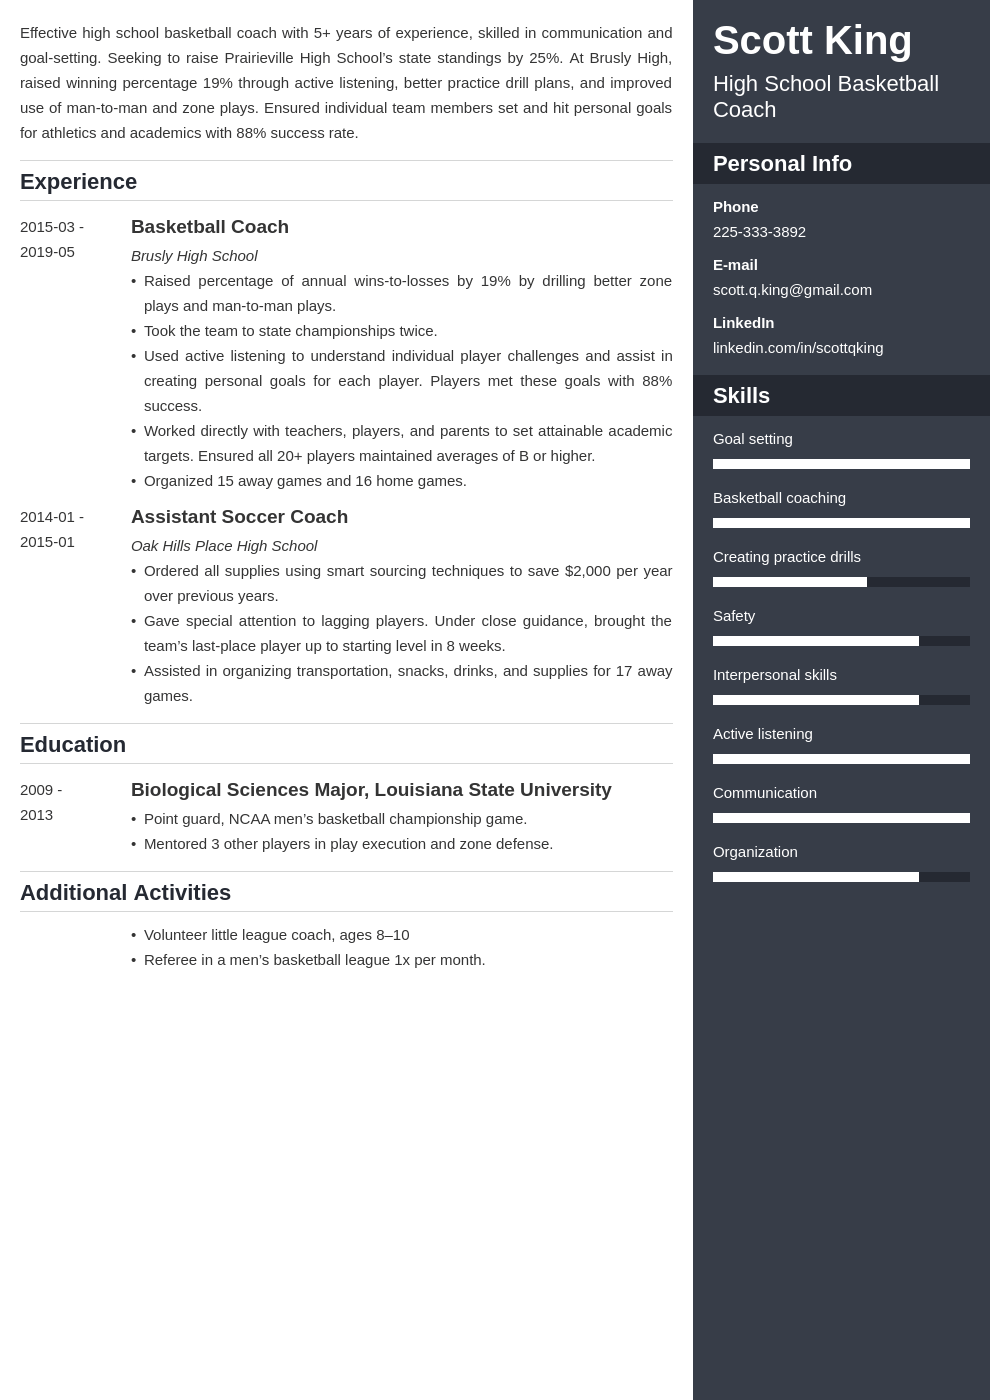 Coaching Resume Samples [Also for High School Coach Jobs]